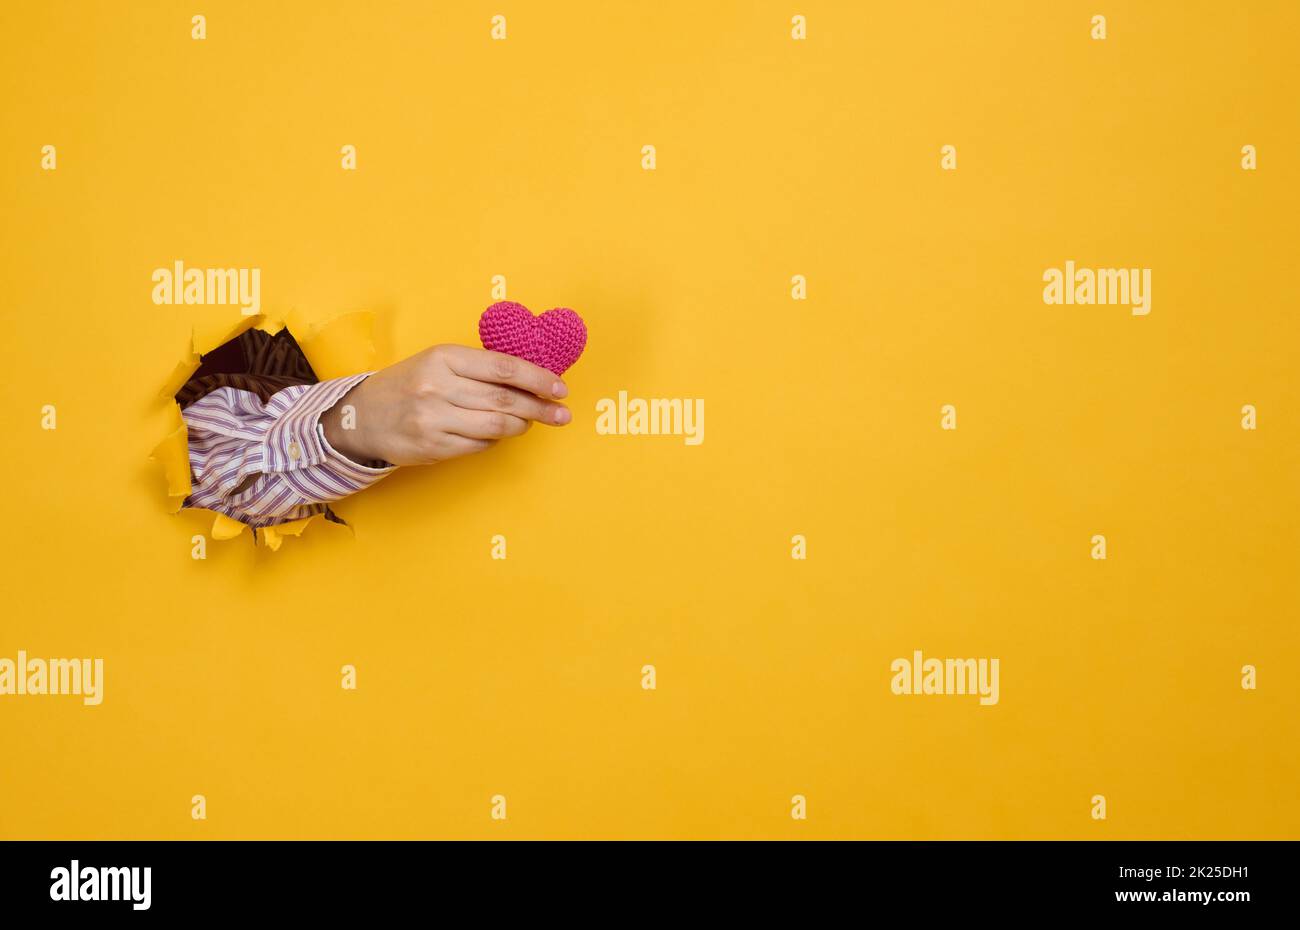 female hand holding a red heart on a yellow background. Part of the body sticks out of the torn paper Stock Photo